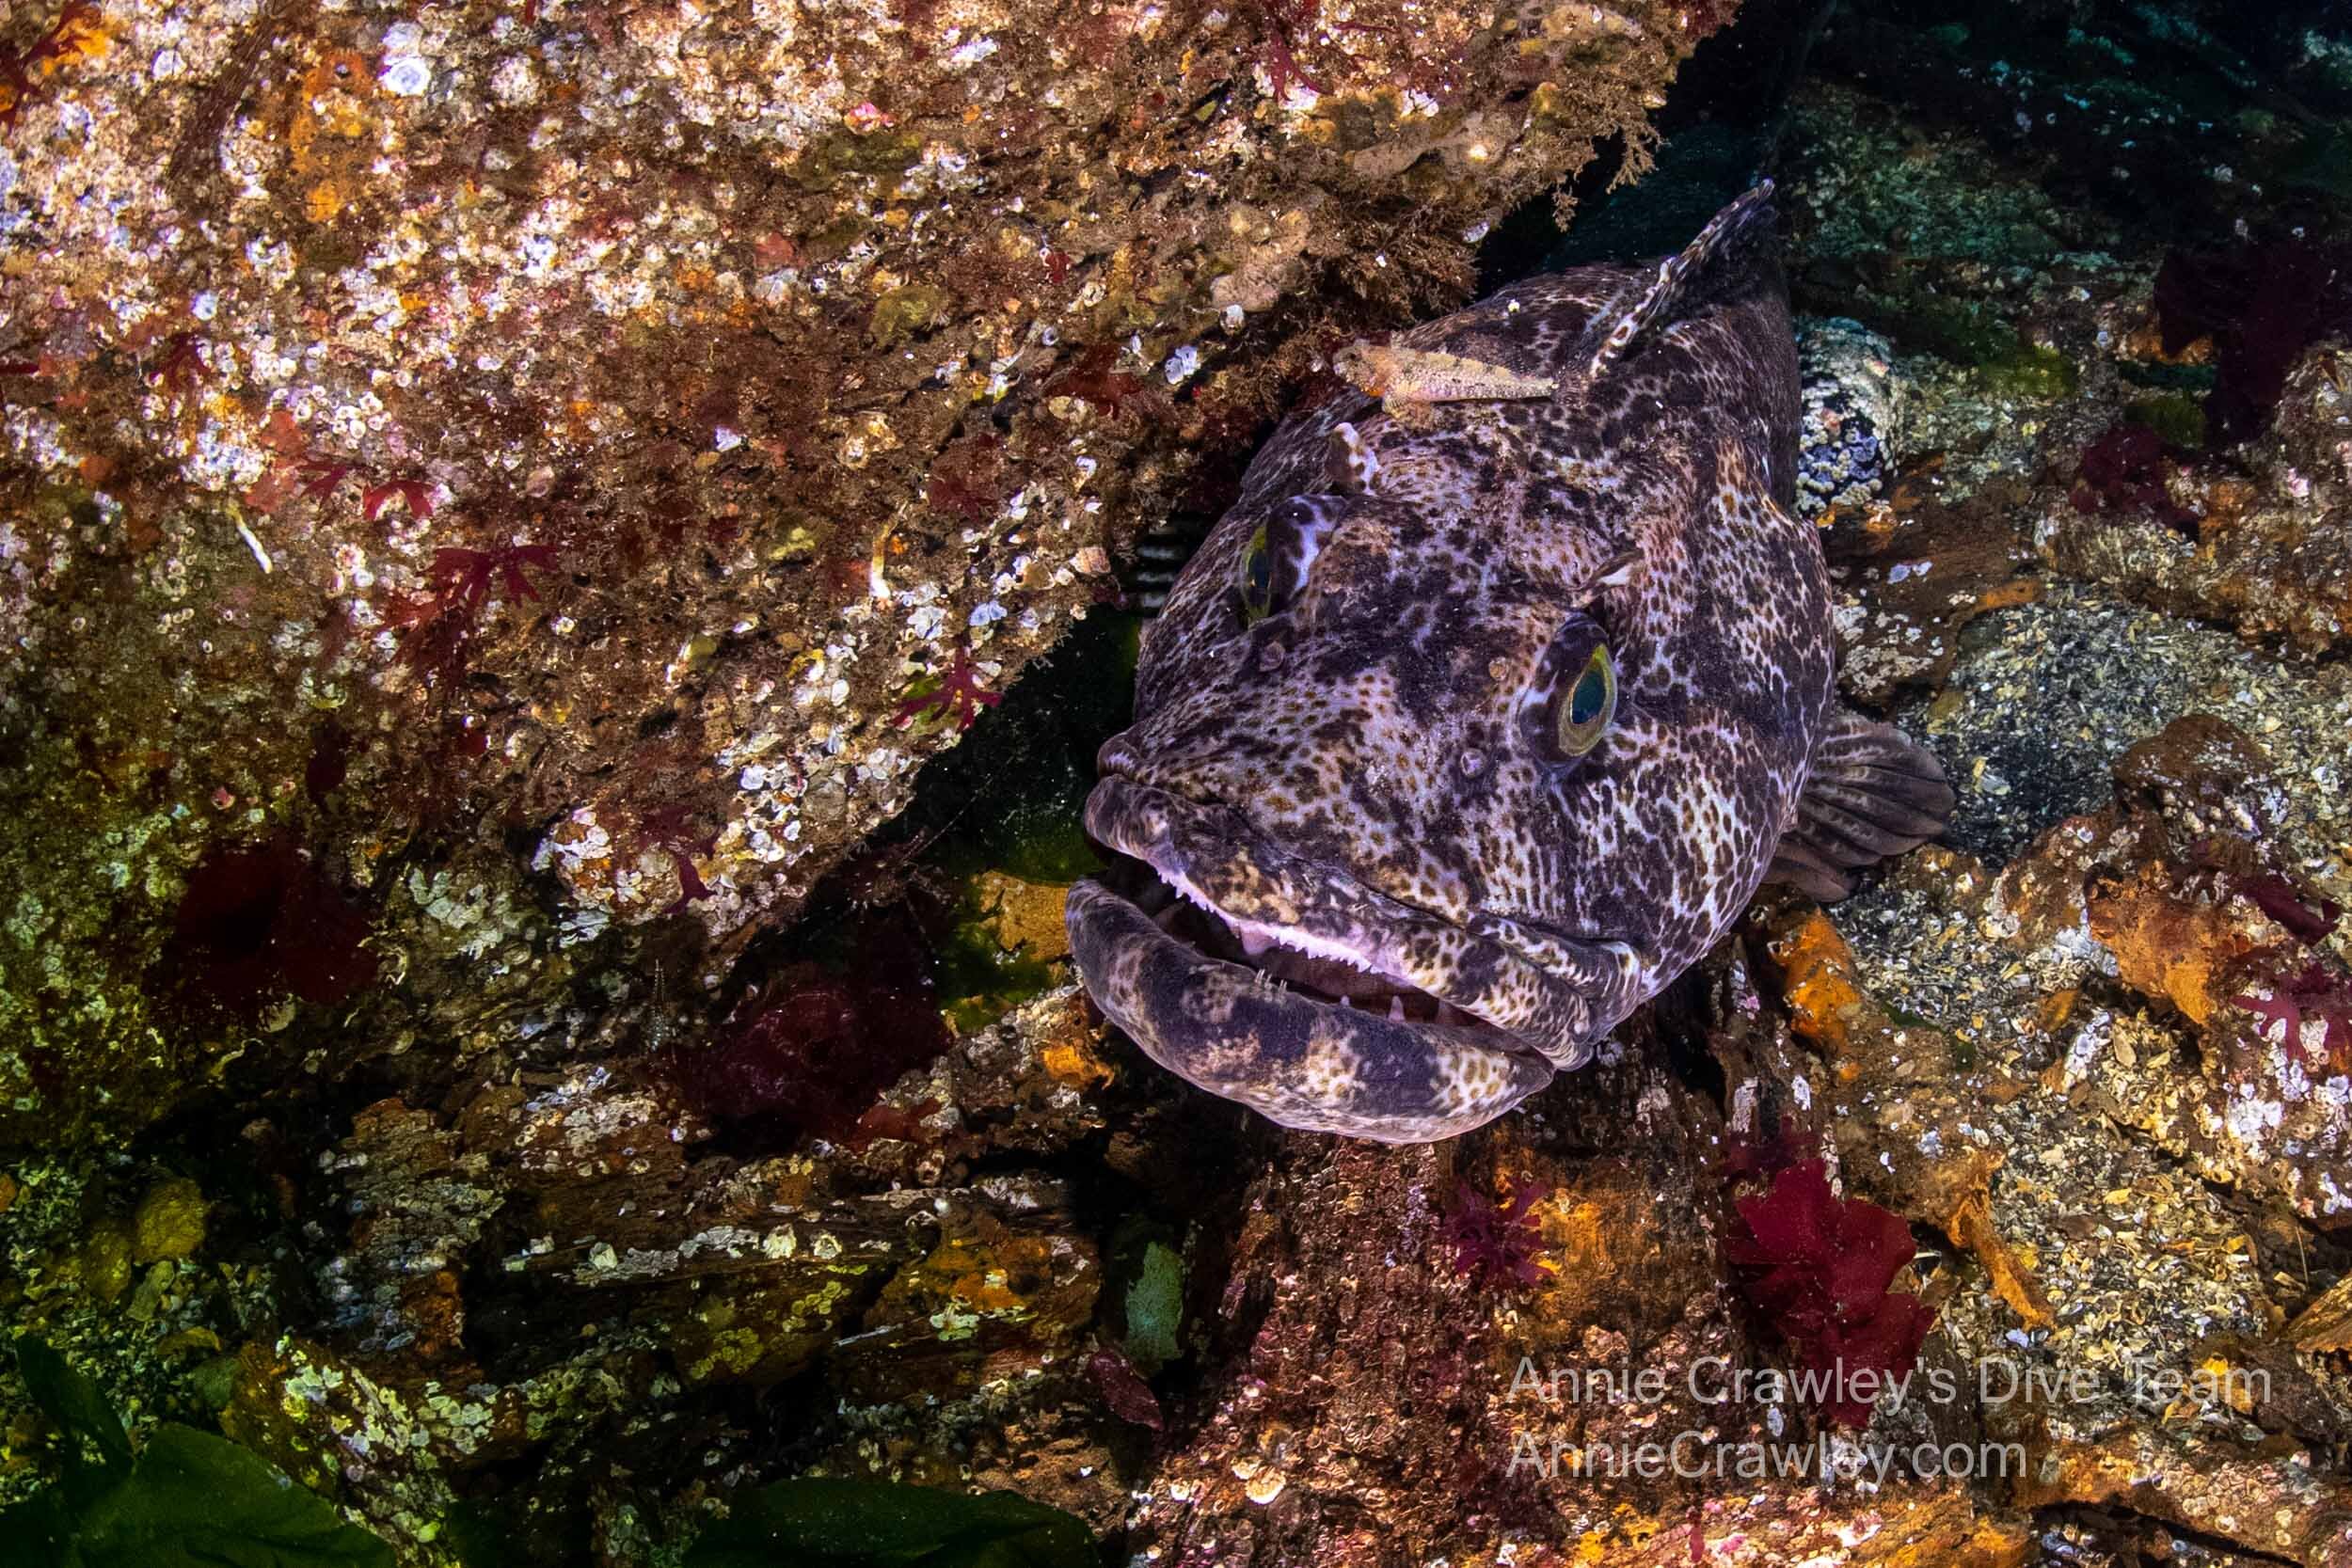 Scalyhead sculpin cleans lingcod